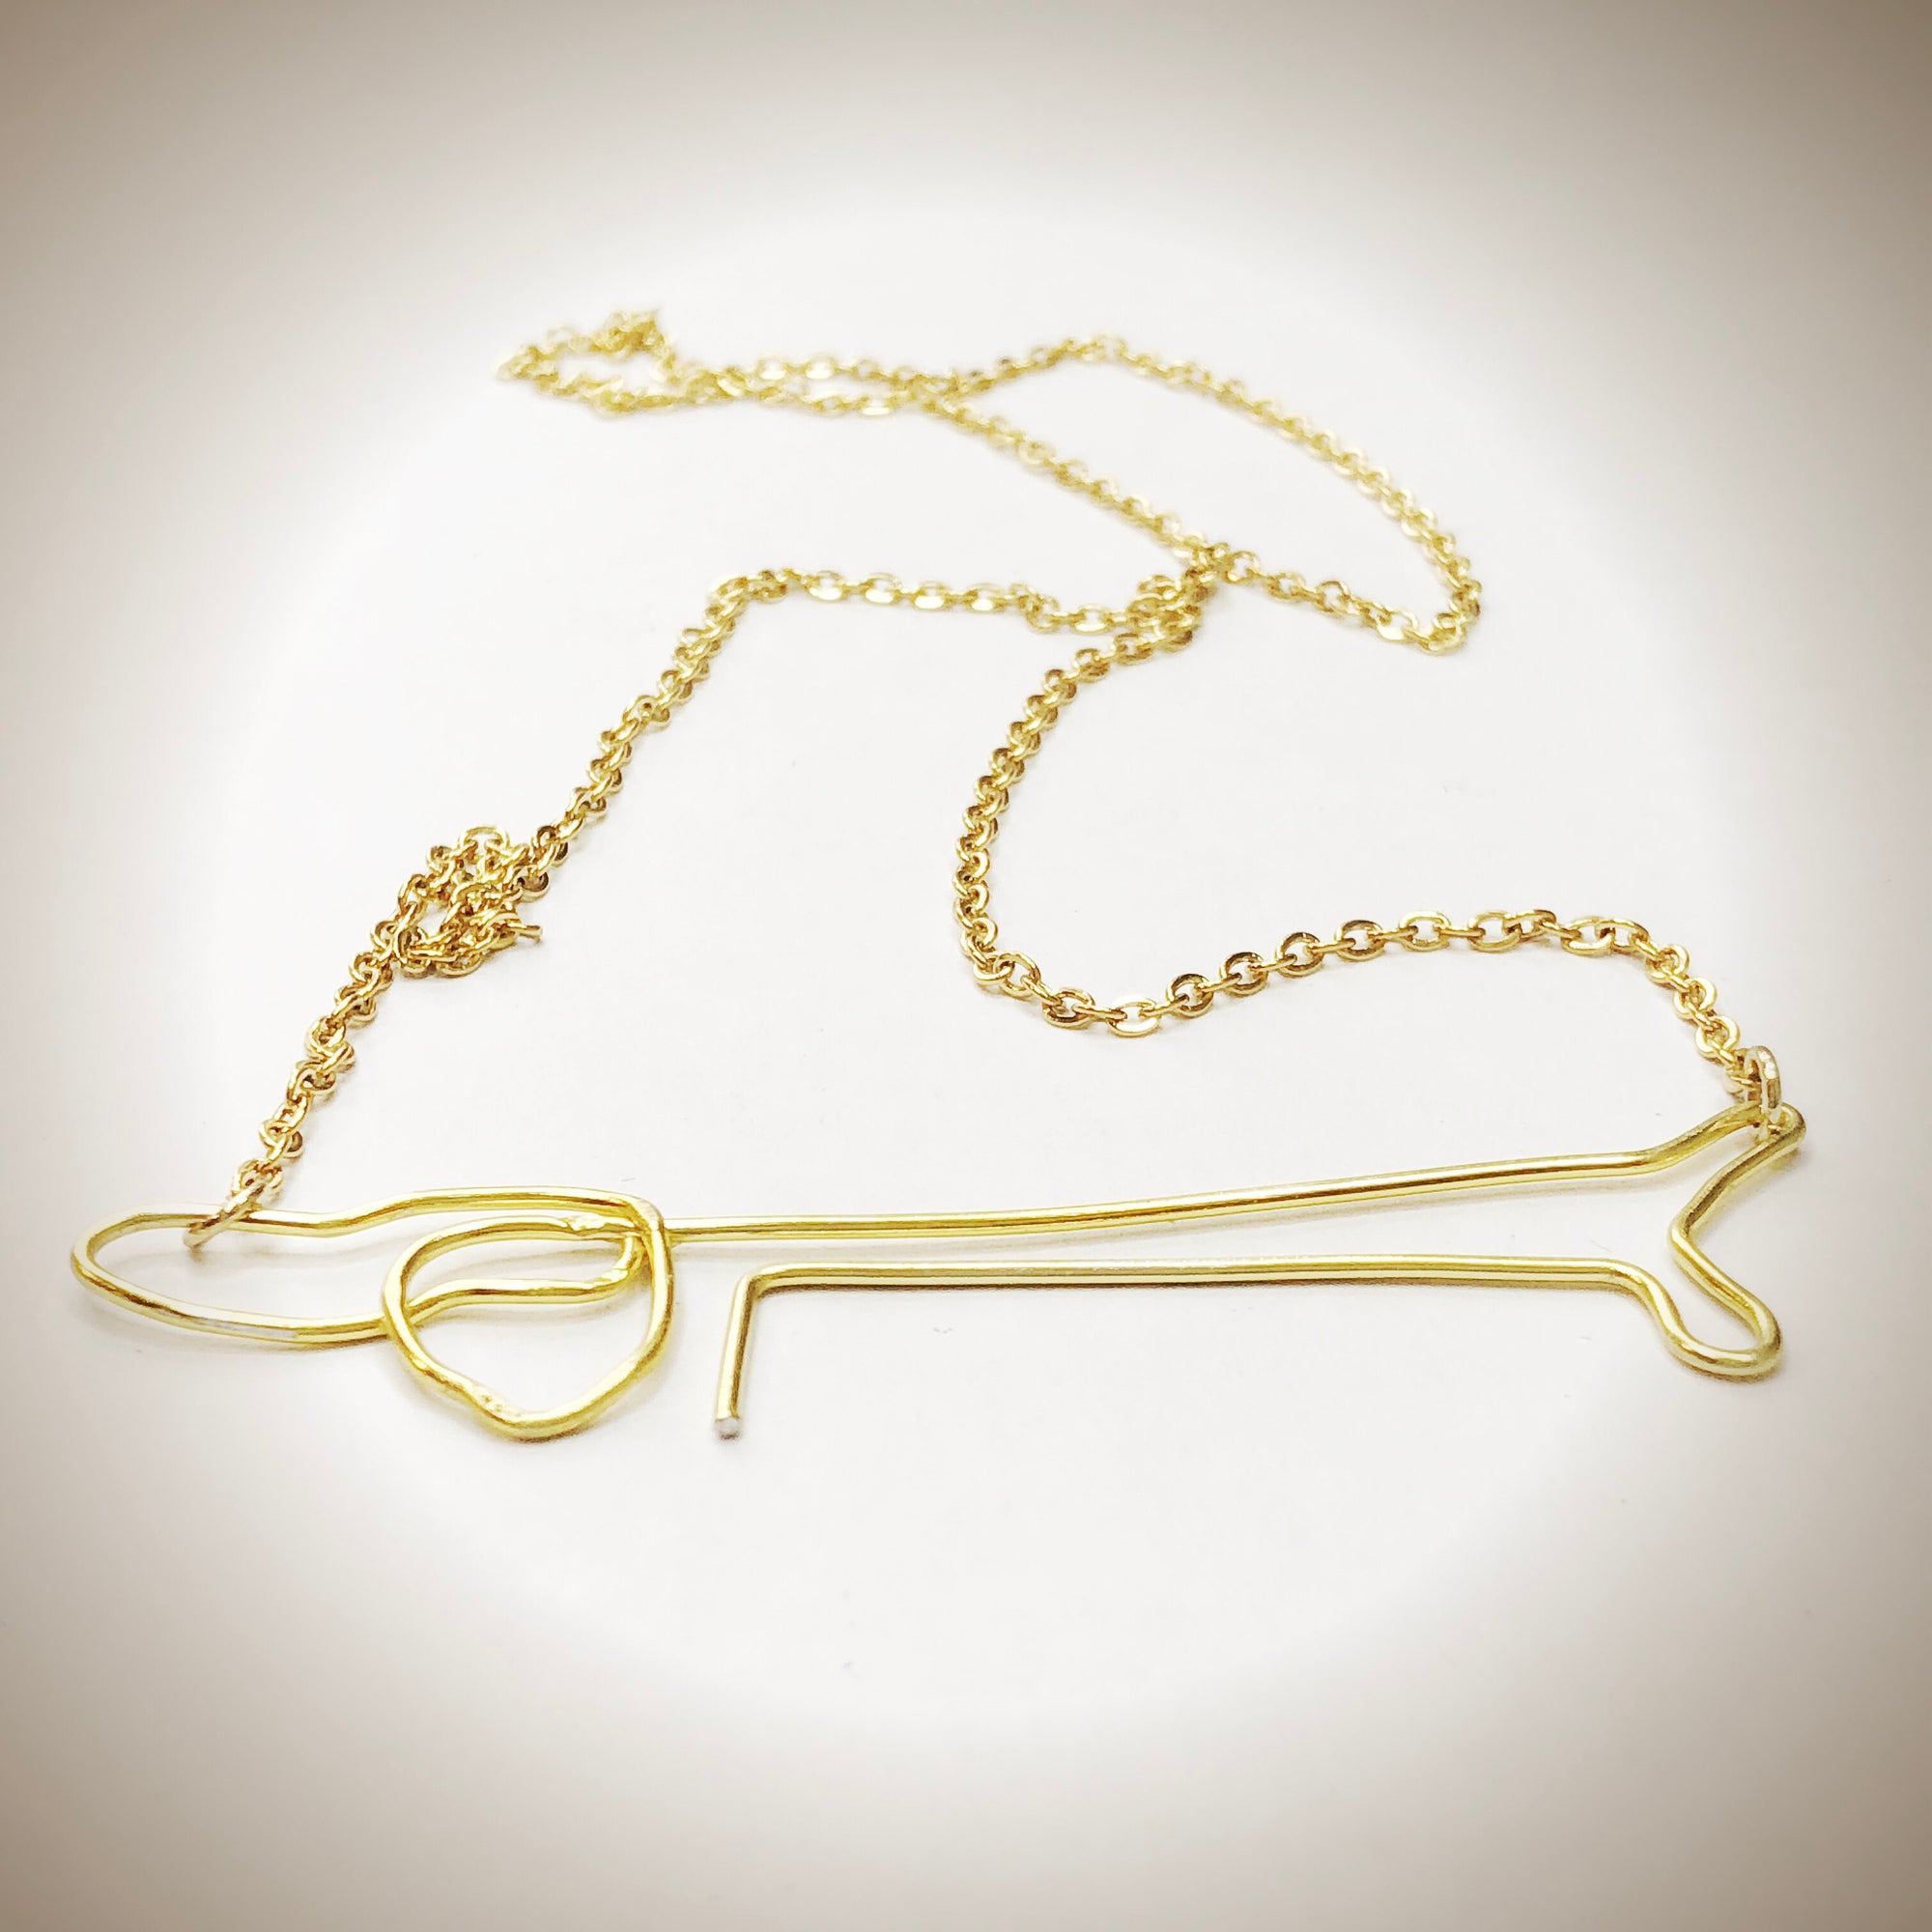 pablo piccaso dachshund dog necklace by HST